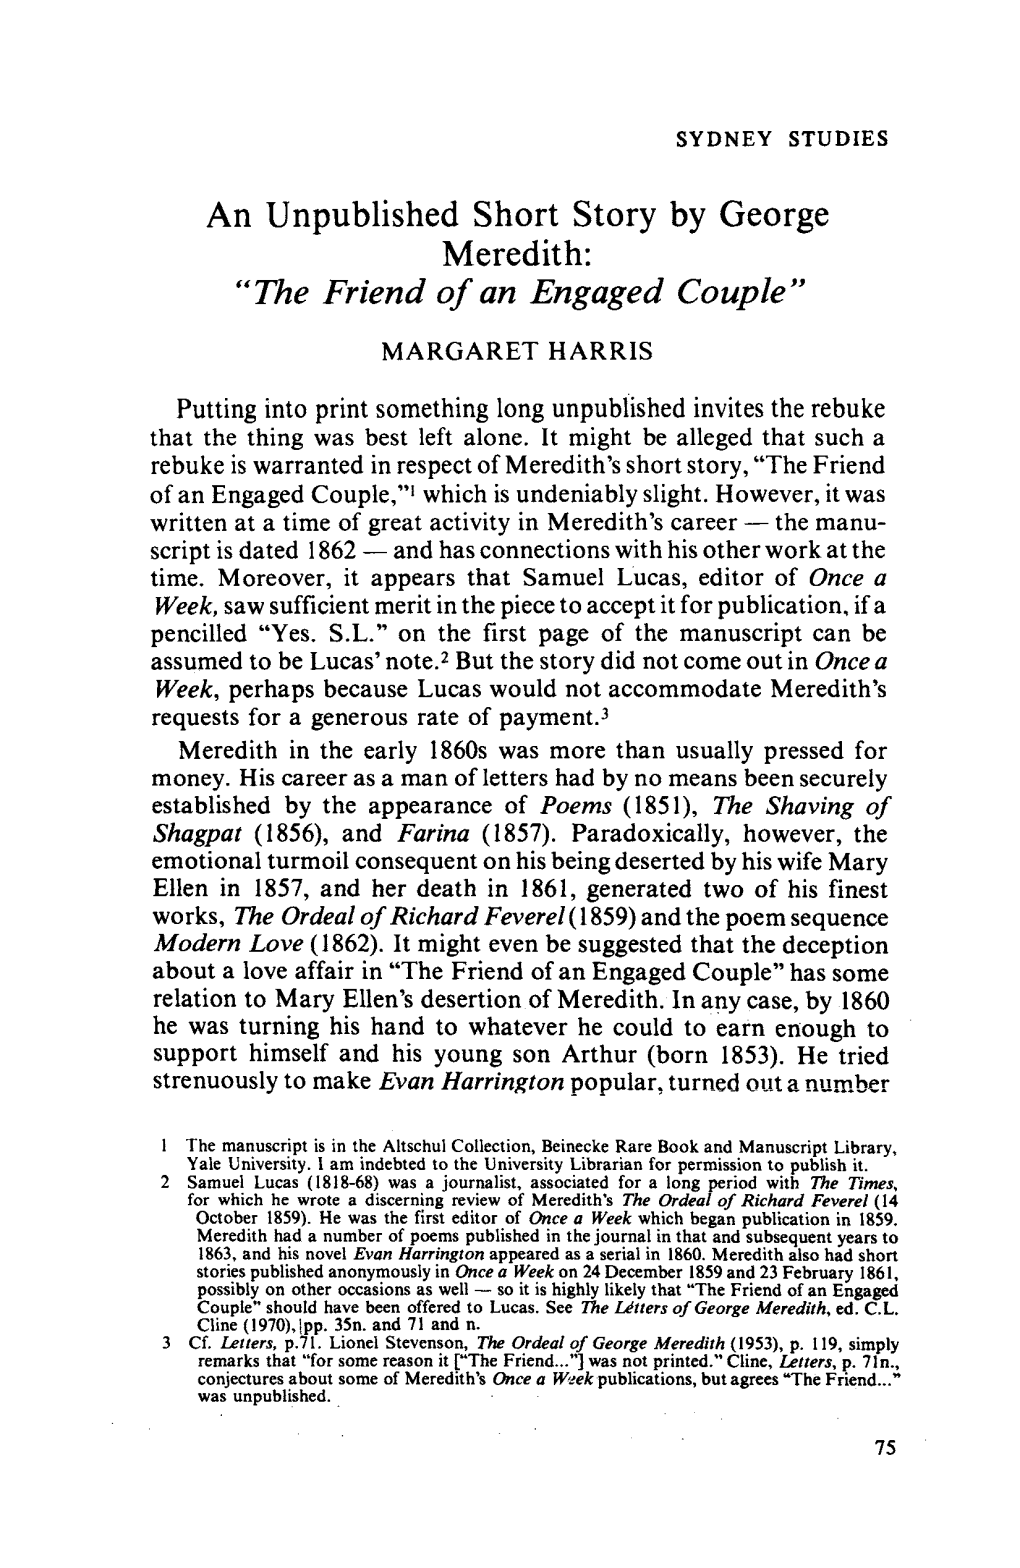 An Unpublished Short Story by George Meredith: "The Friend Ofan Engaged Couple"